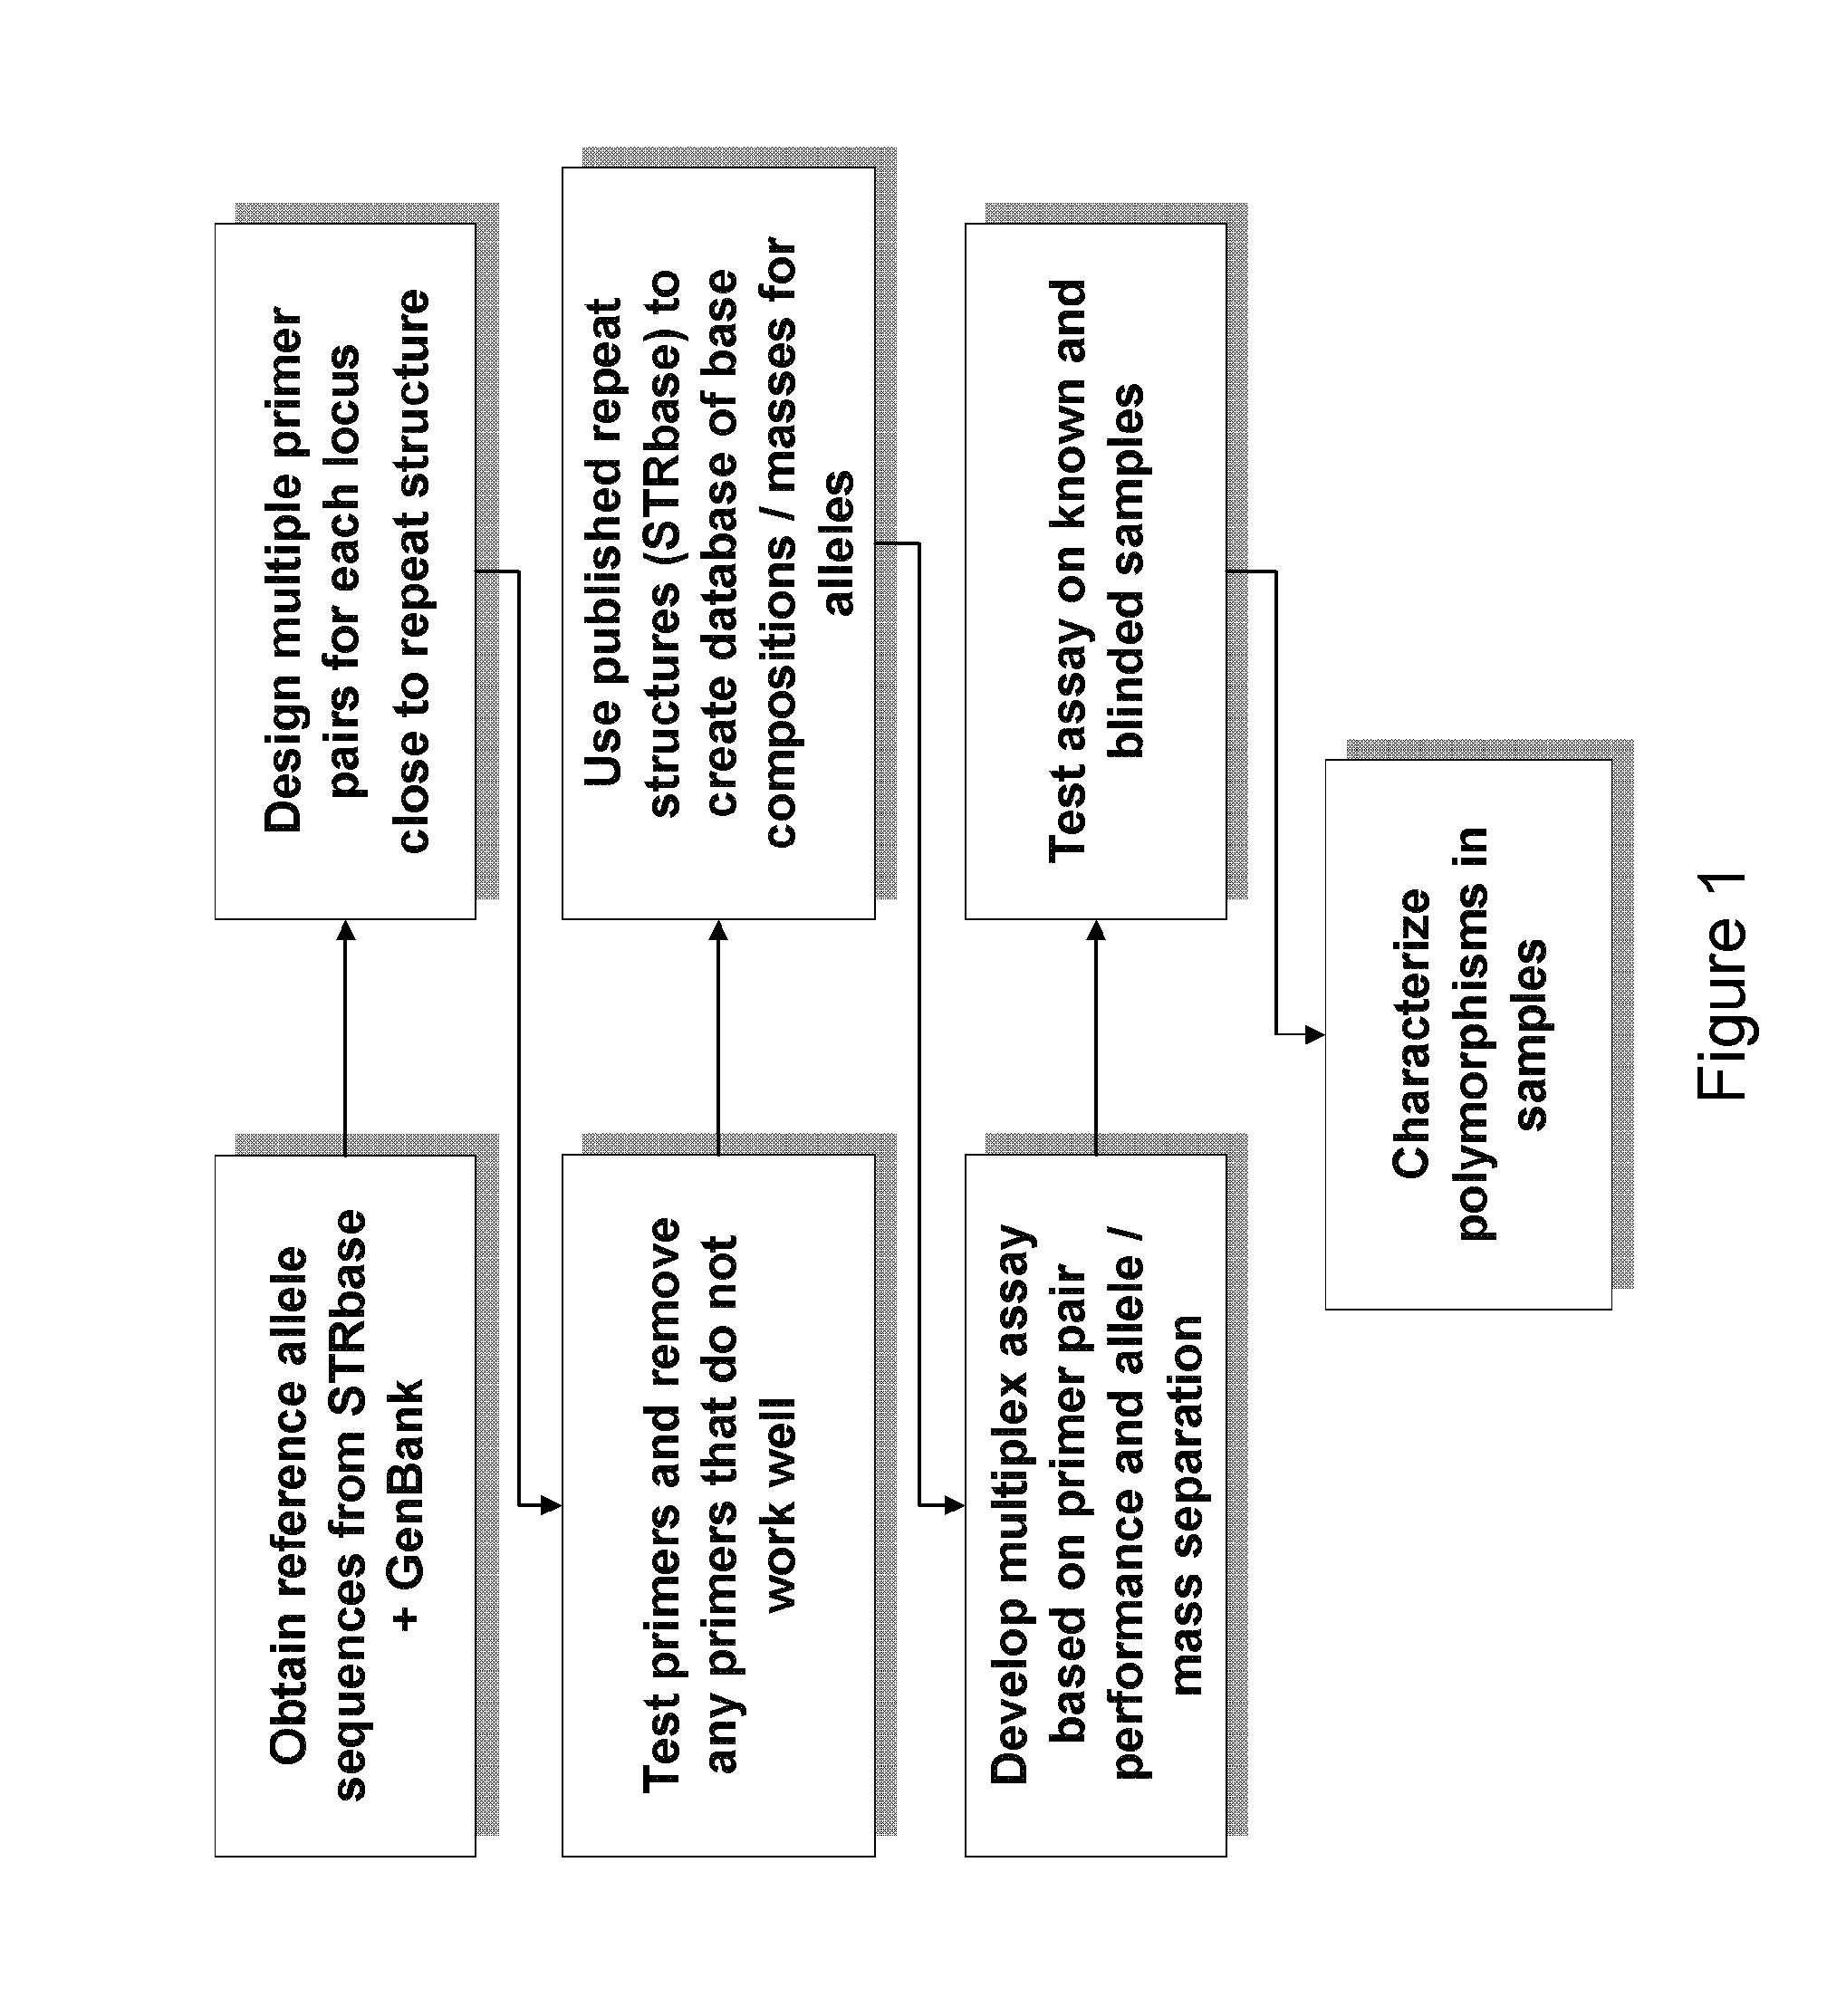 Methods For Rapid Forensic DNA Analysis